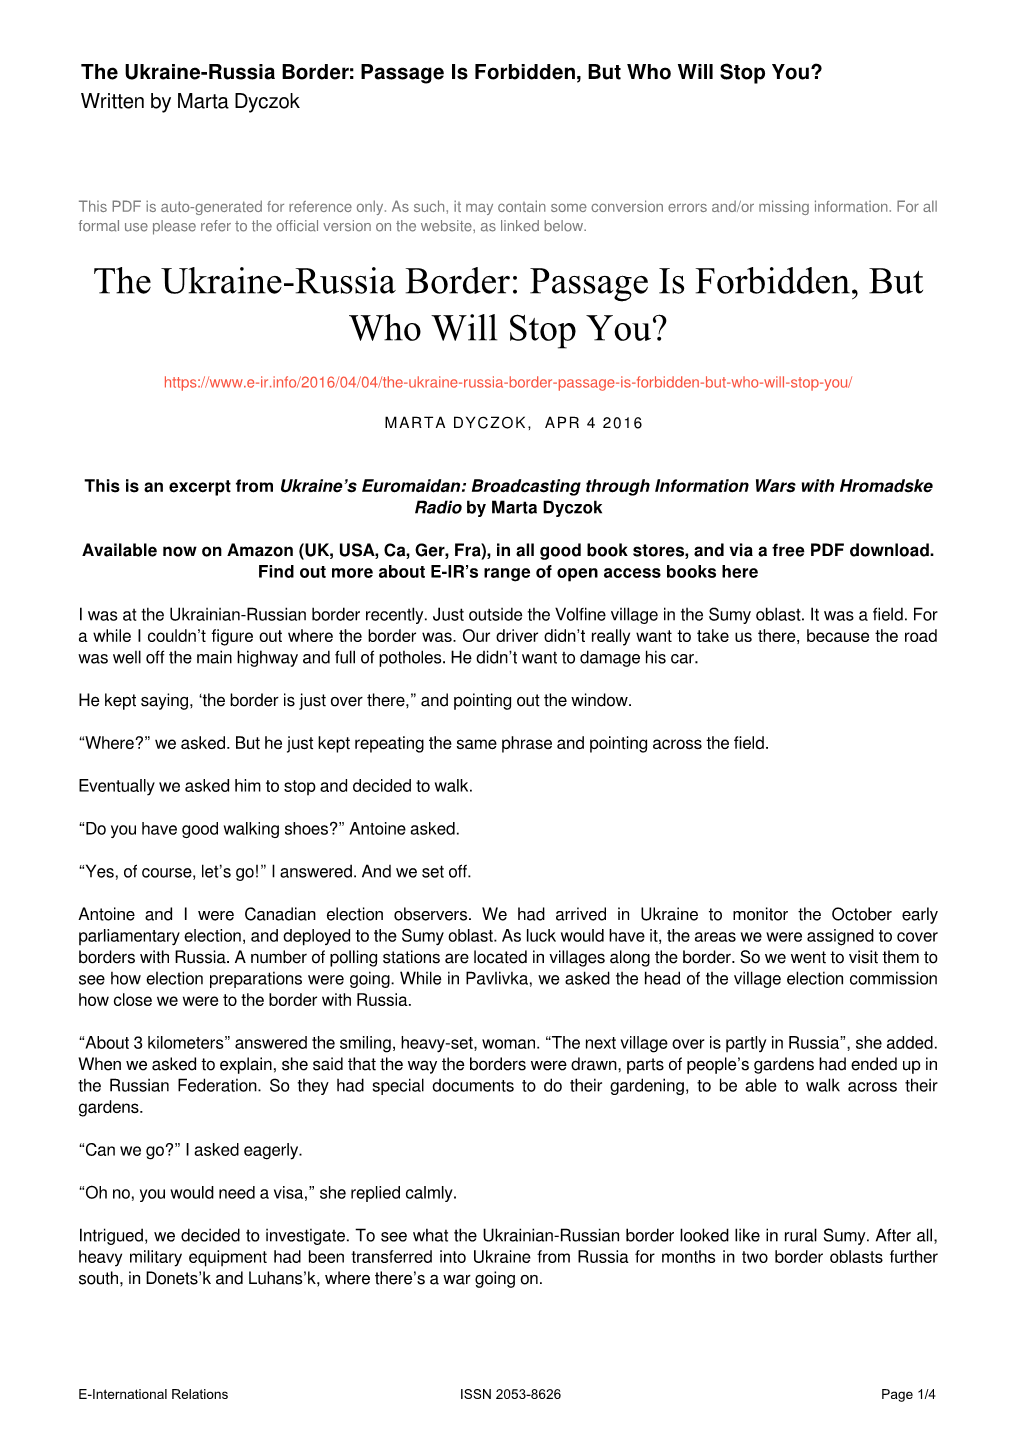 The Ukraine-Russia Border: Passage Is Forbidden, but Who Will Stop You? Written by Marta Dyczok